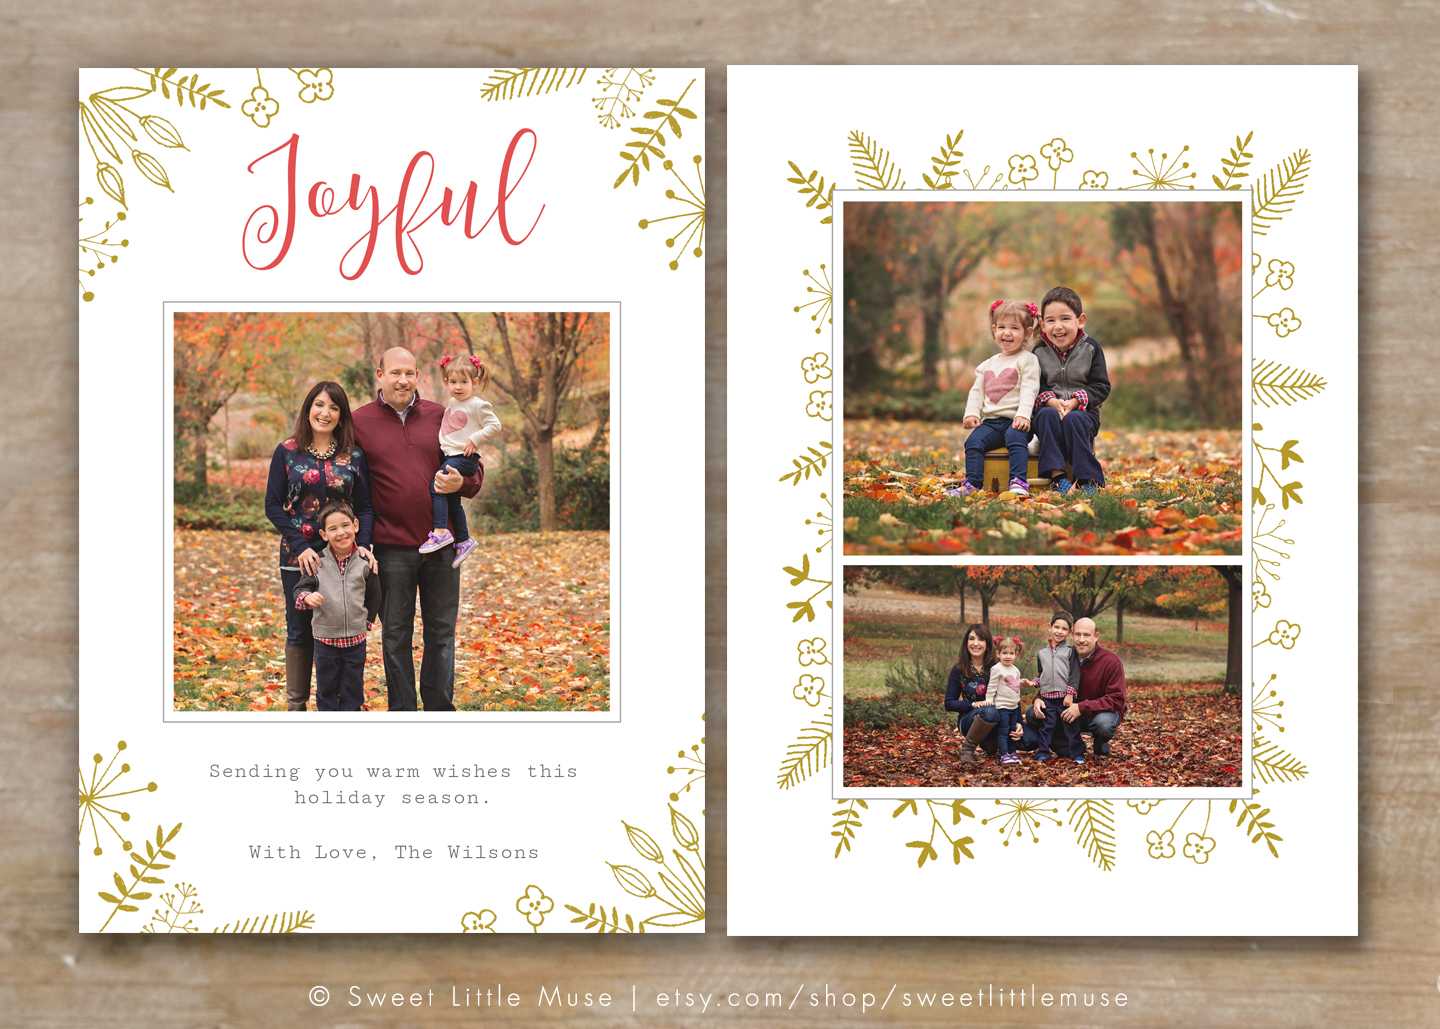 30 Holiday Card Templates For Photographers To Use This Year Throughout Holiday Card Templates For Photographers